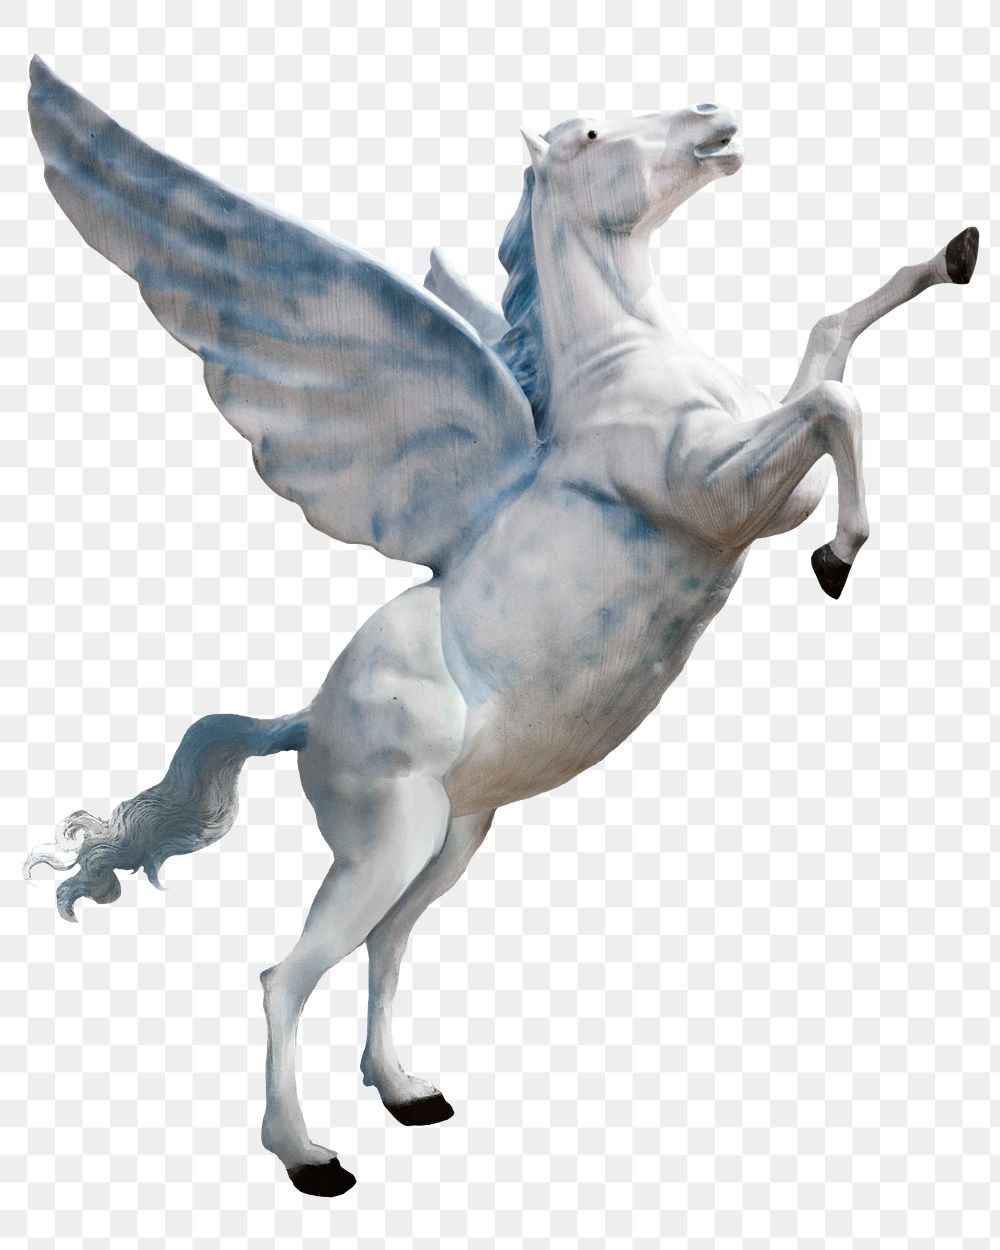 Png white Pegasus statue, remixed from artworks by John Margolies